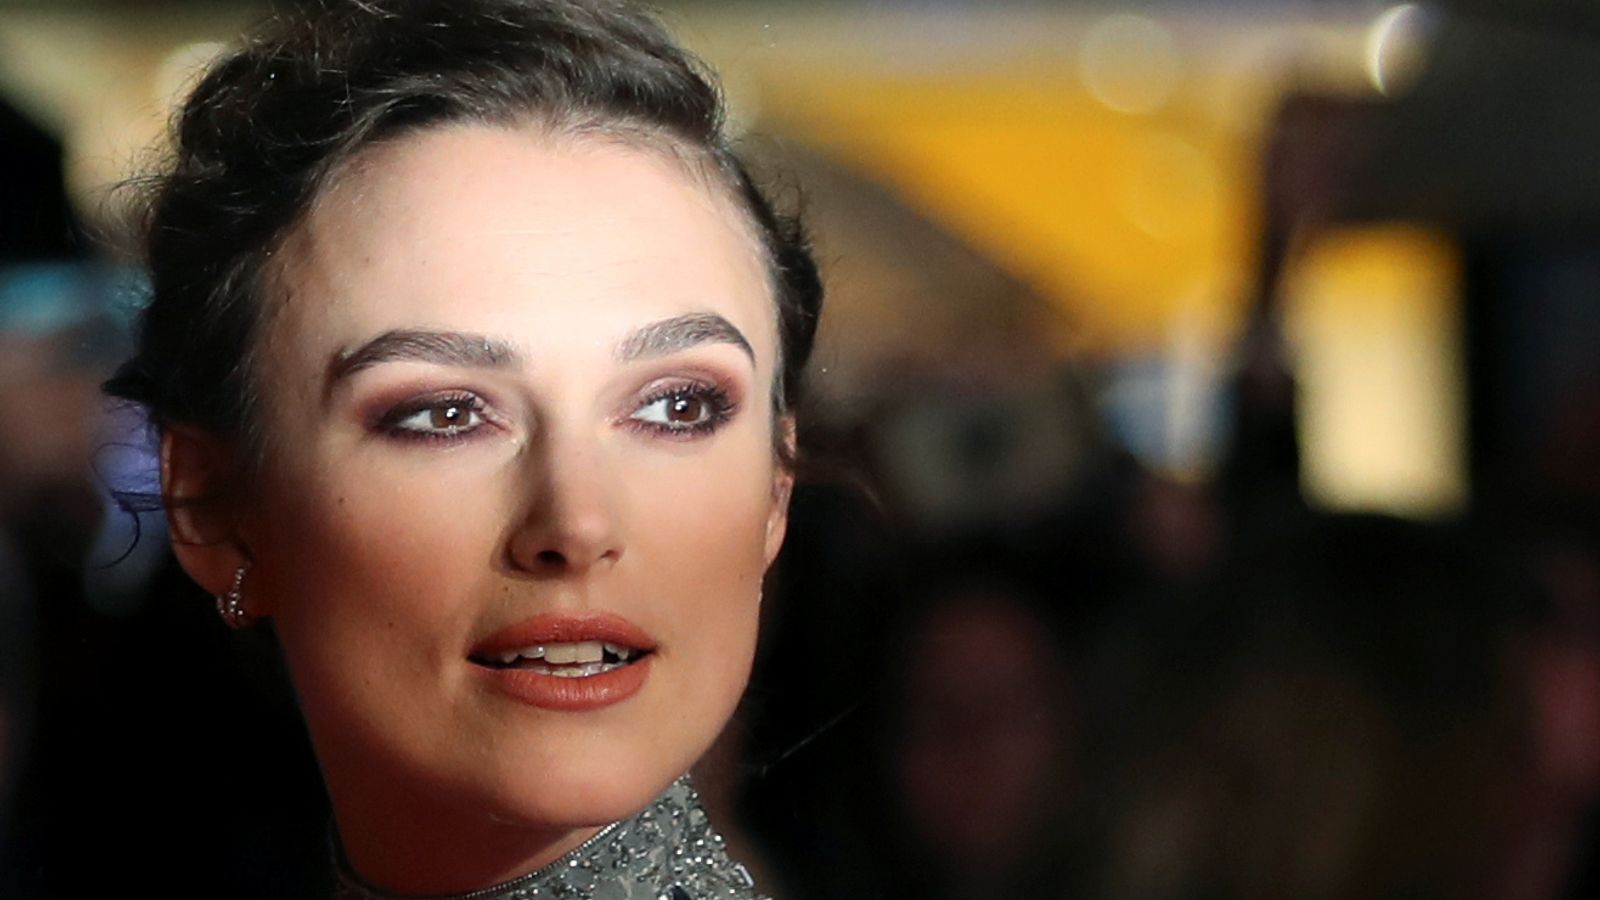 Keira Knightley says harassment of women is ‘depressing’ and ‘literally everyone’ has been a victim